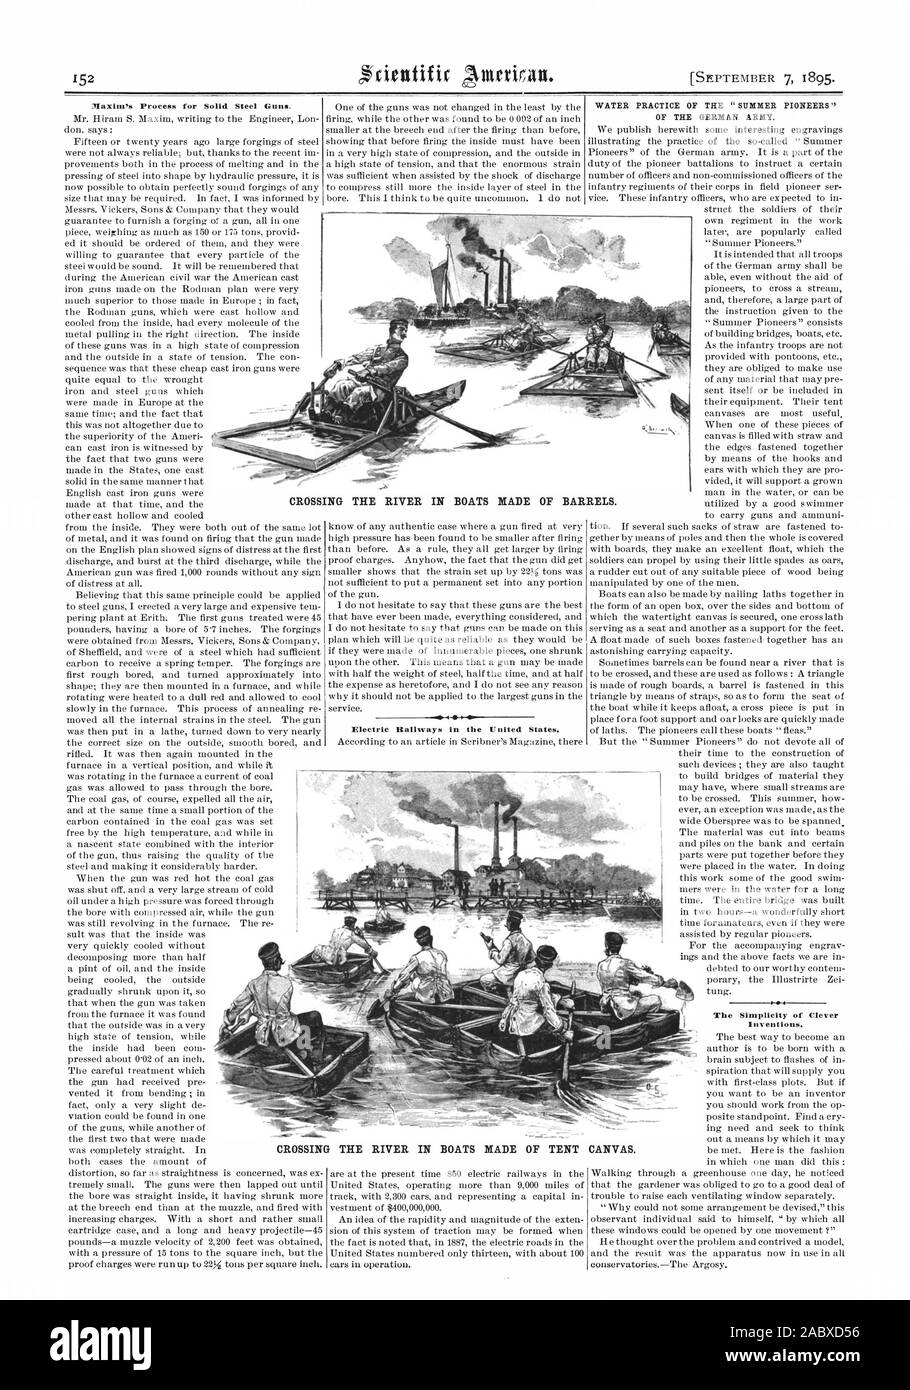 Maxim's Process for Solid Steel Guns. Electric Railways in the United States. WATER PRACTICE OF THE 'SUMMER PIONEERS' OF THE GERMAN ARMY. Inventions. CROSSING THE CROSSING THE RIVER IN BOATS MADE OF BARRELS. RIVER IN BOATS MADE OF TENT CANVAS., scientific american, 1895-09-07 Stock Photo